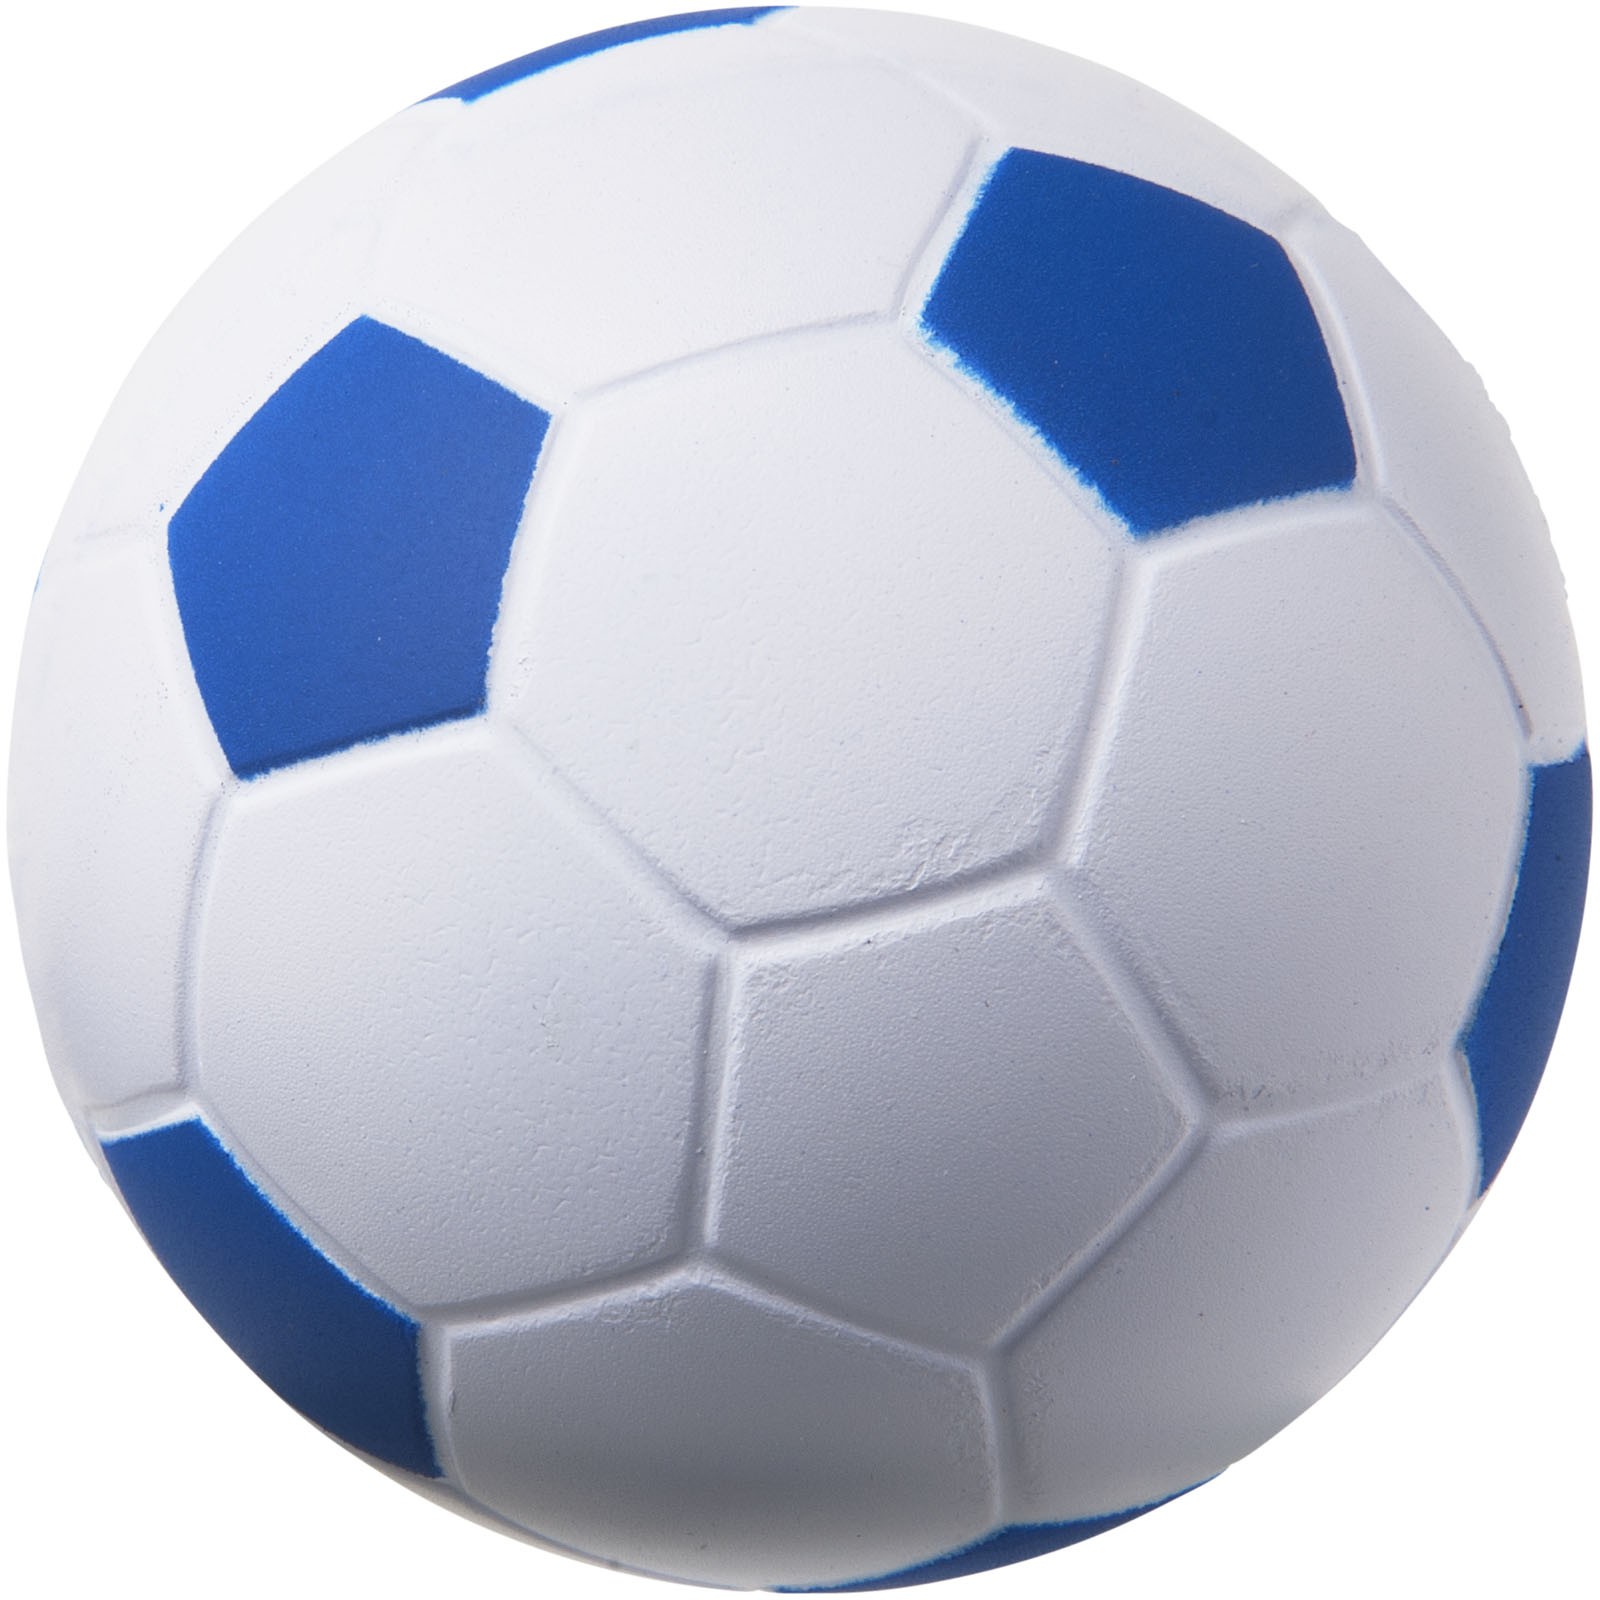 Football stress reliever - Royal Blue / White